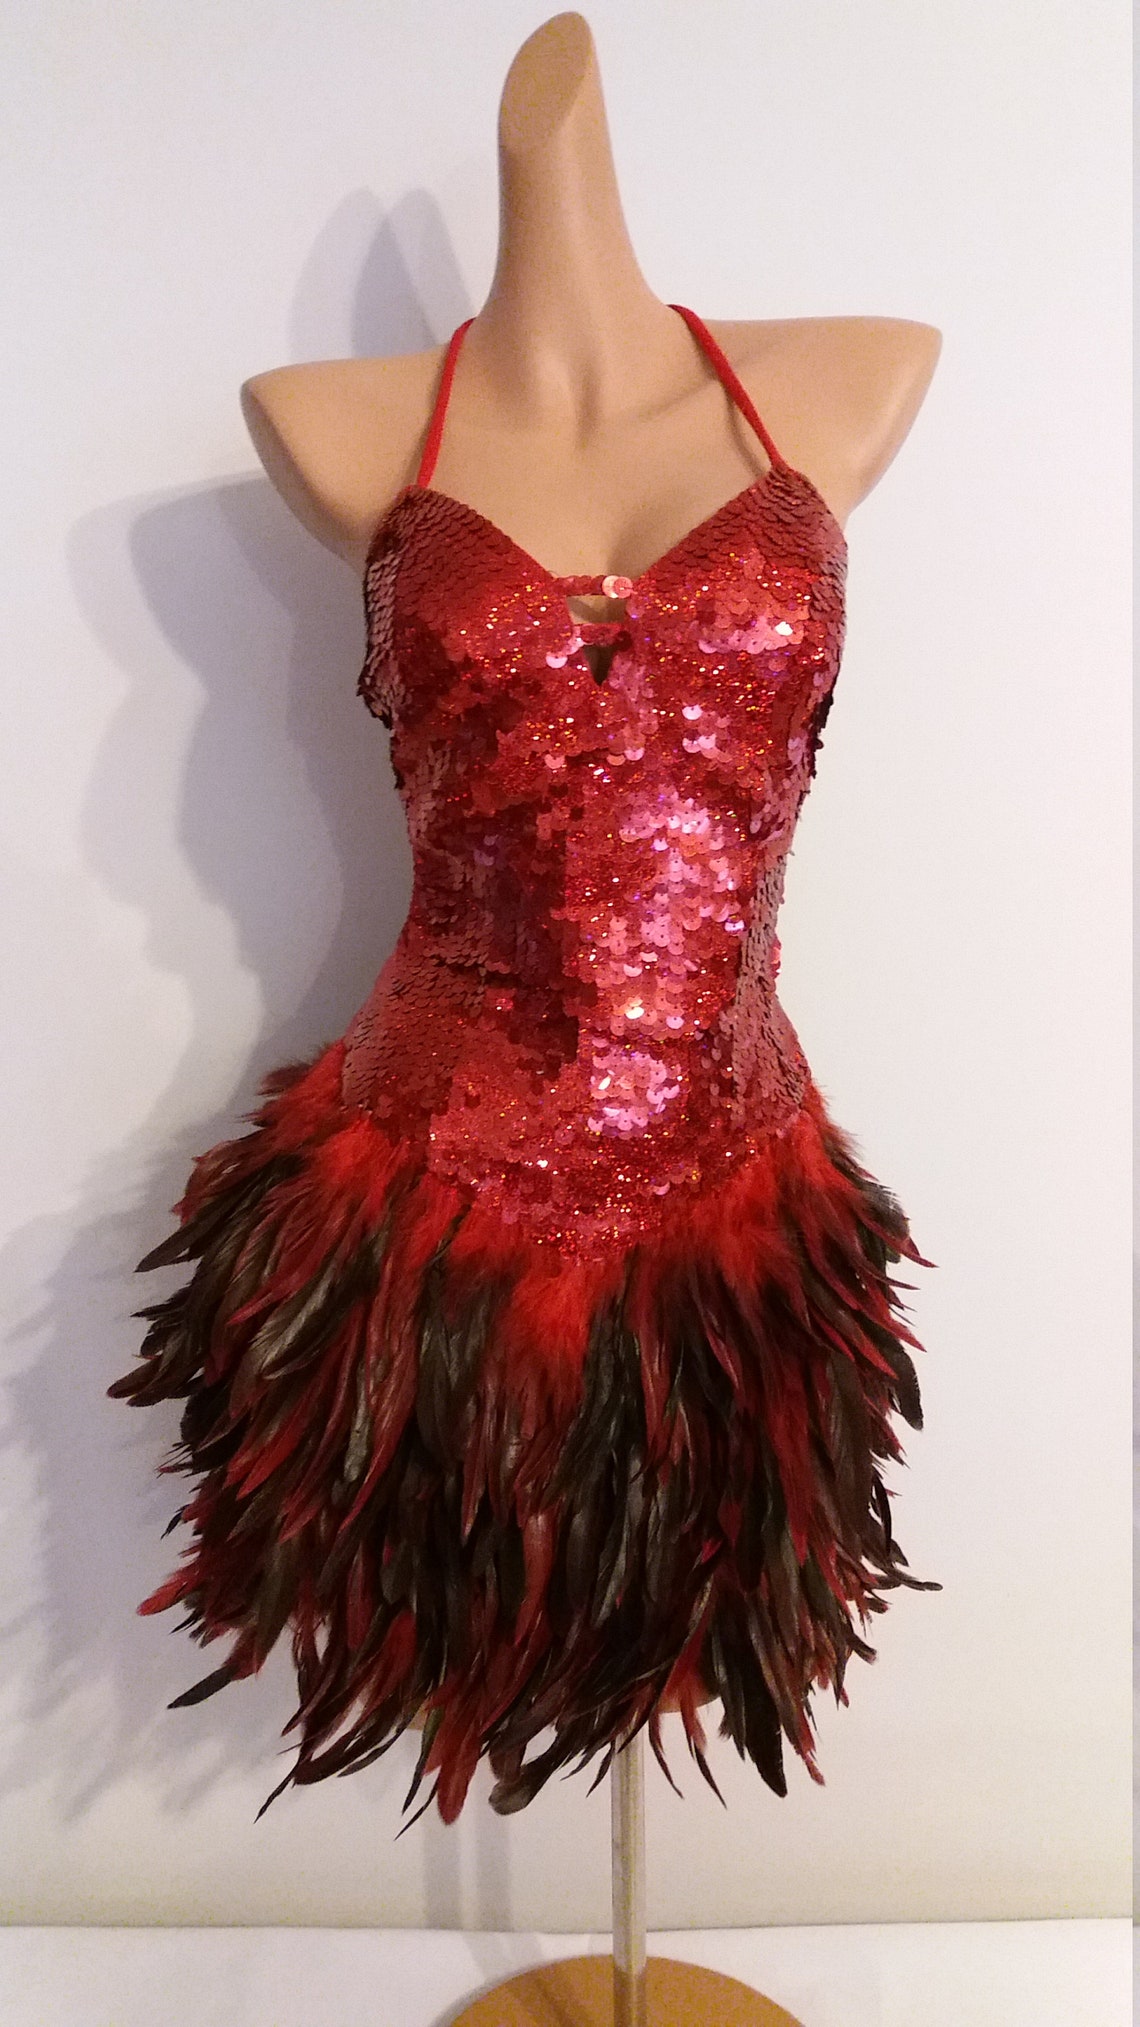 RED color Beads Feather Dress Carnival Brazil Las Vegas | Etsy